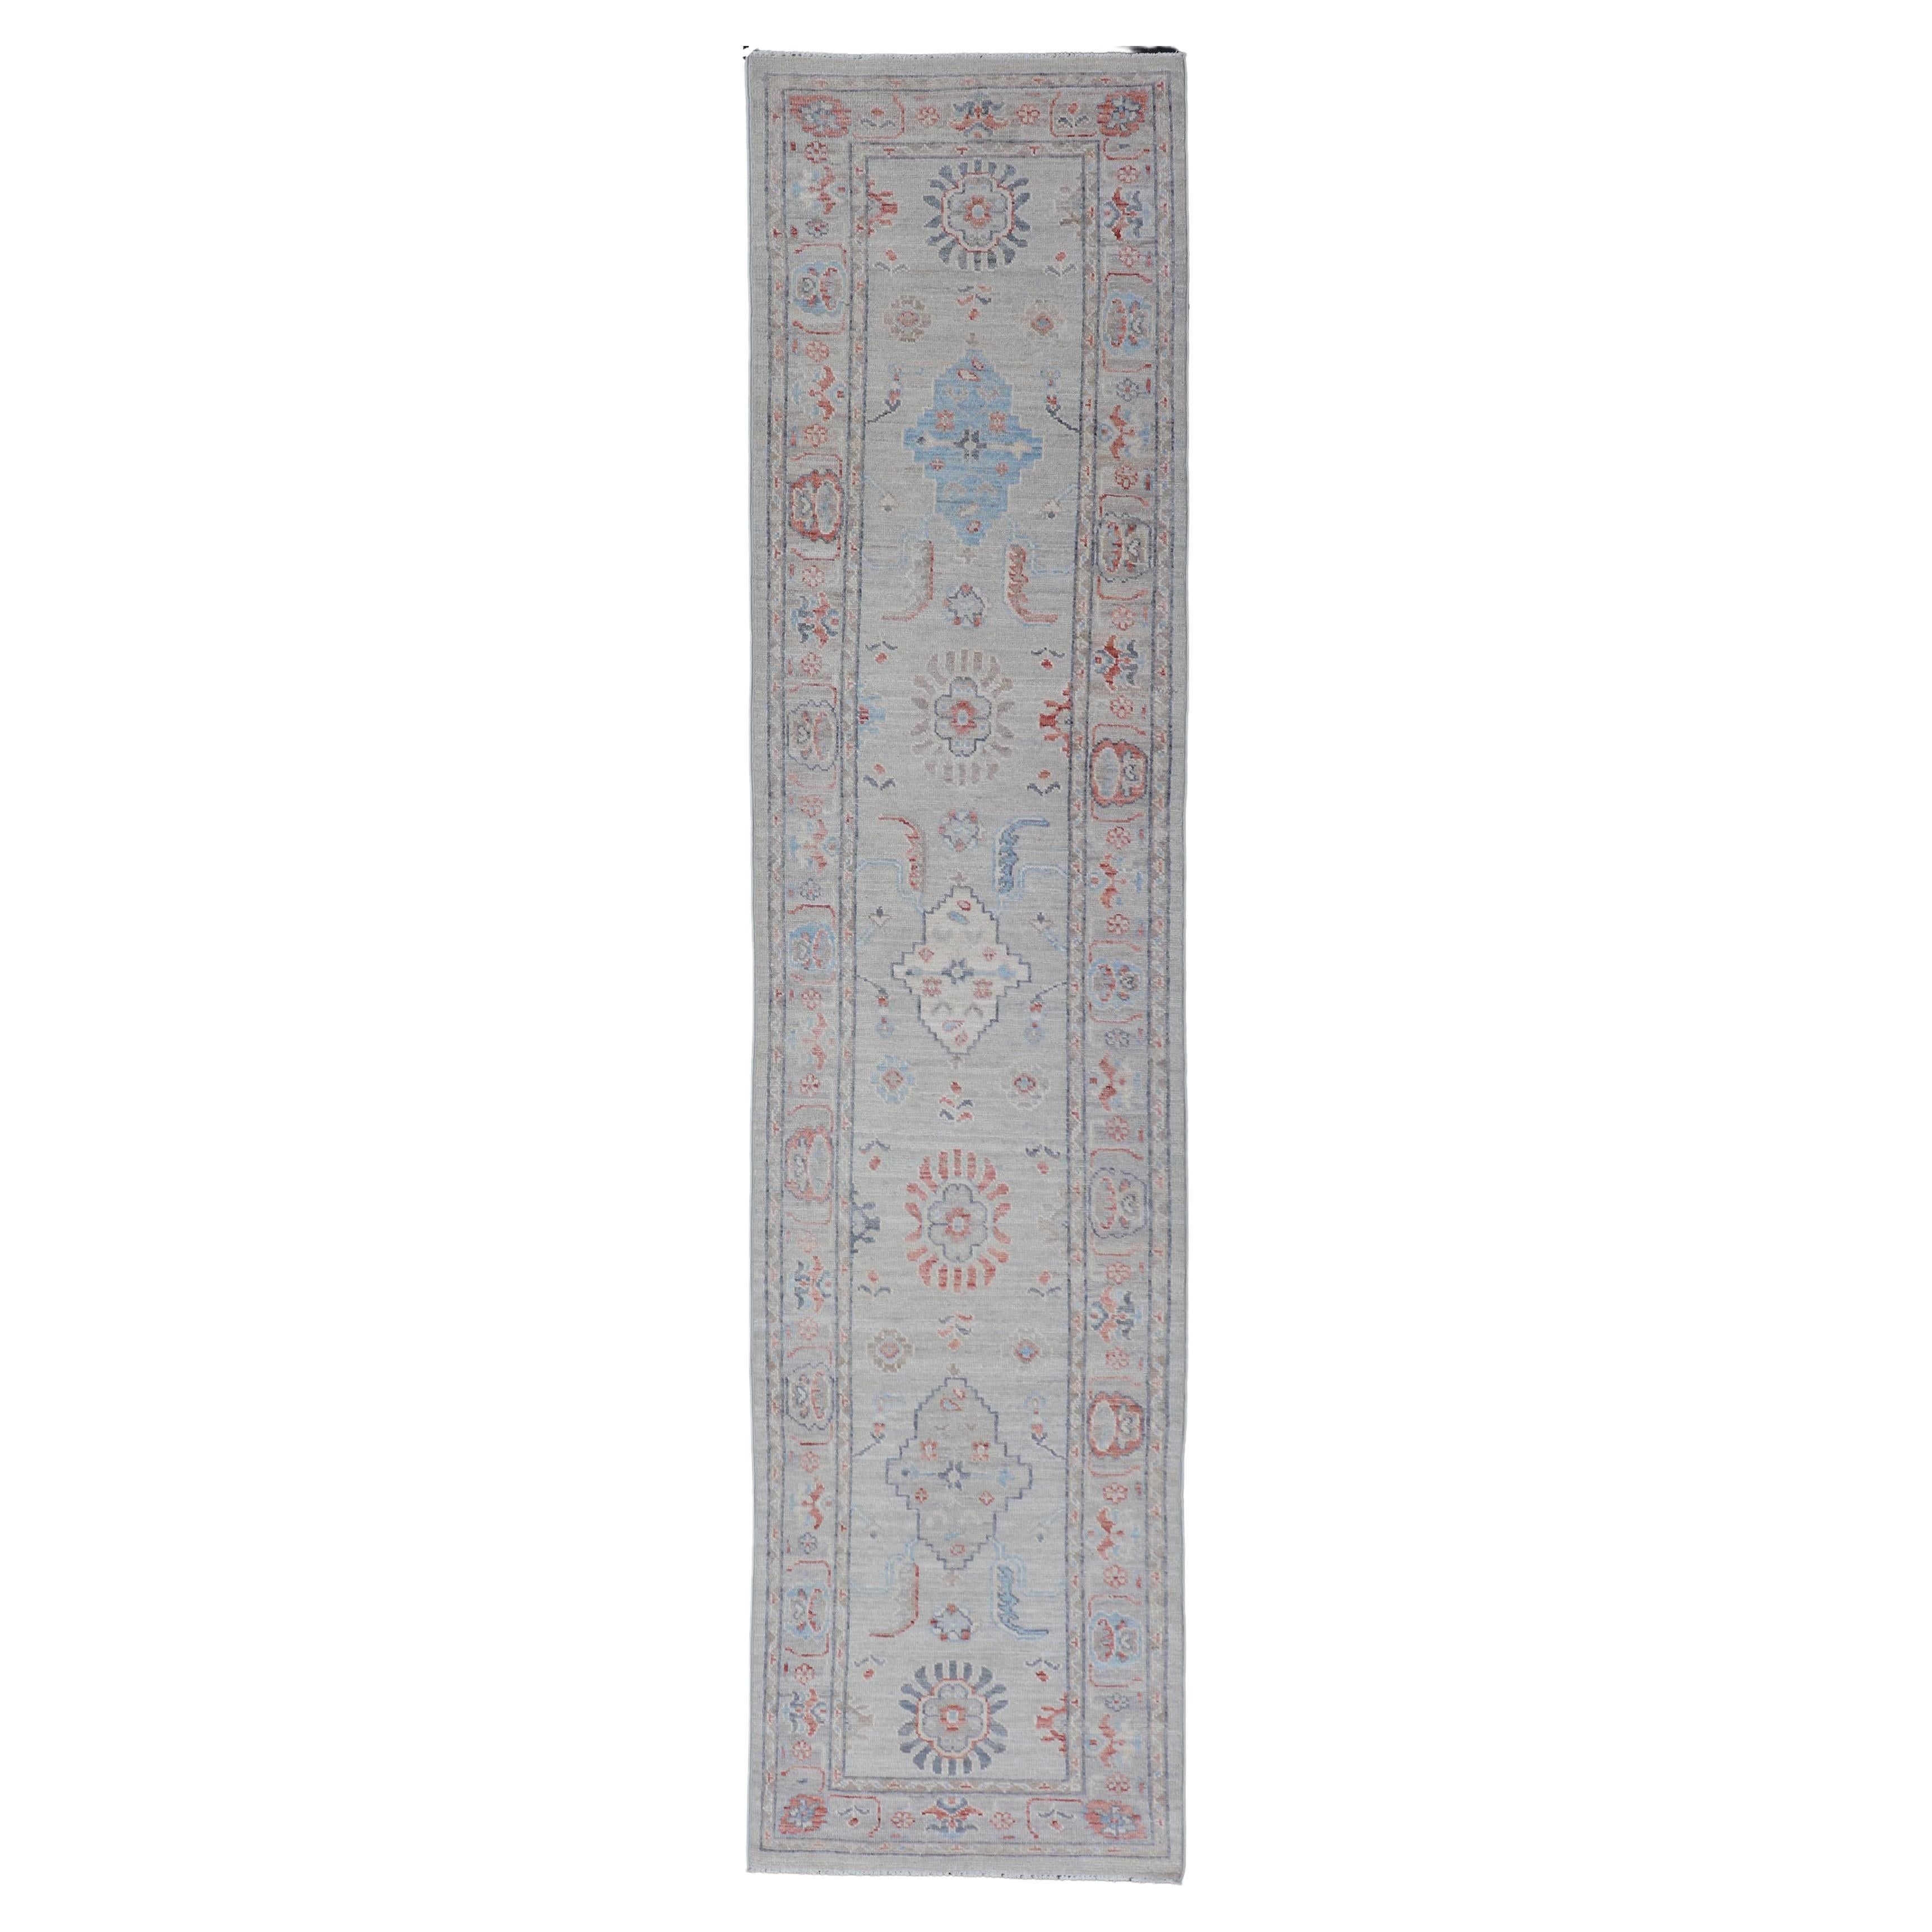 Afghan Hand Knotted Oushak with Coral and Blue Motifs on Light Gray Background